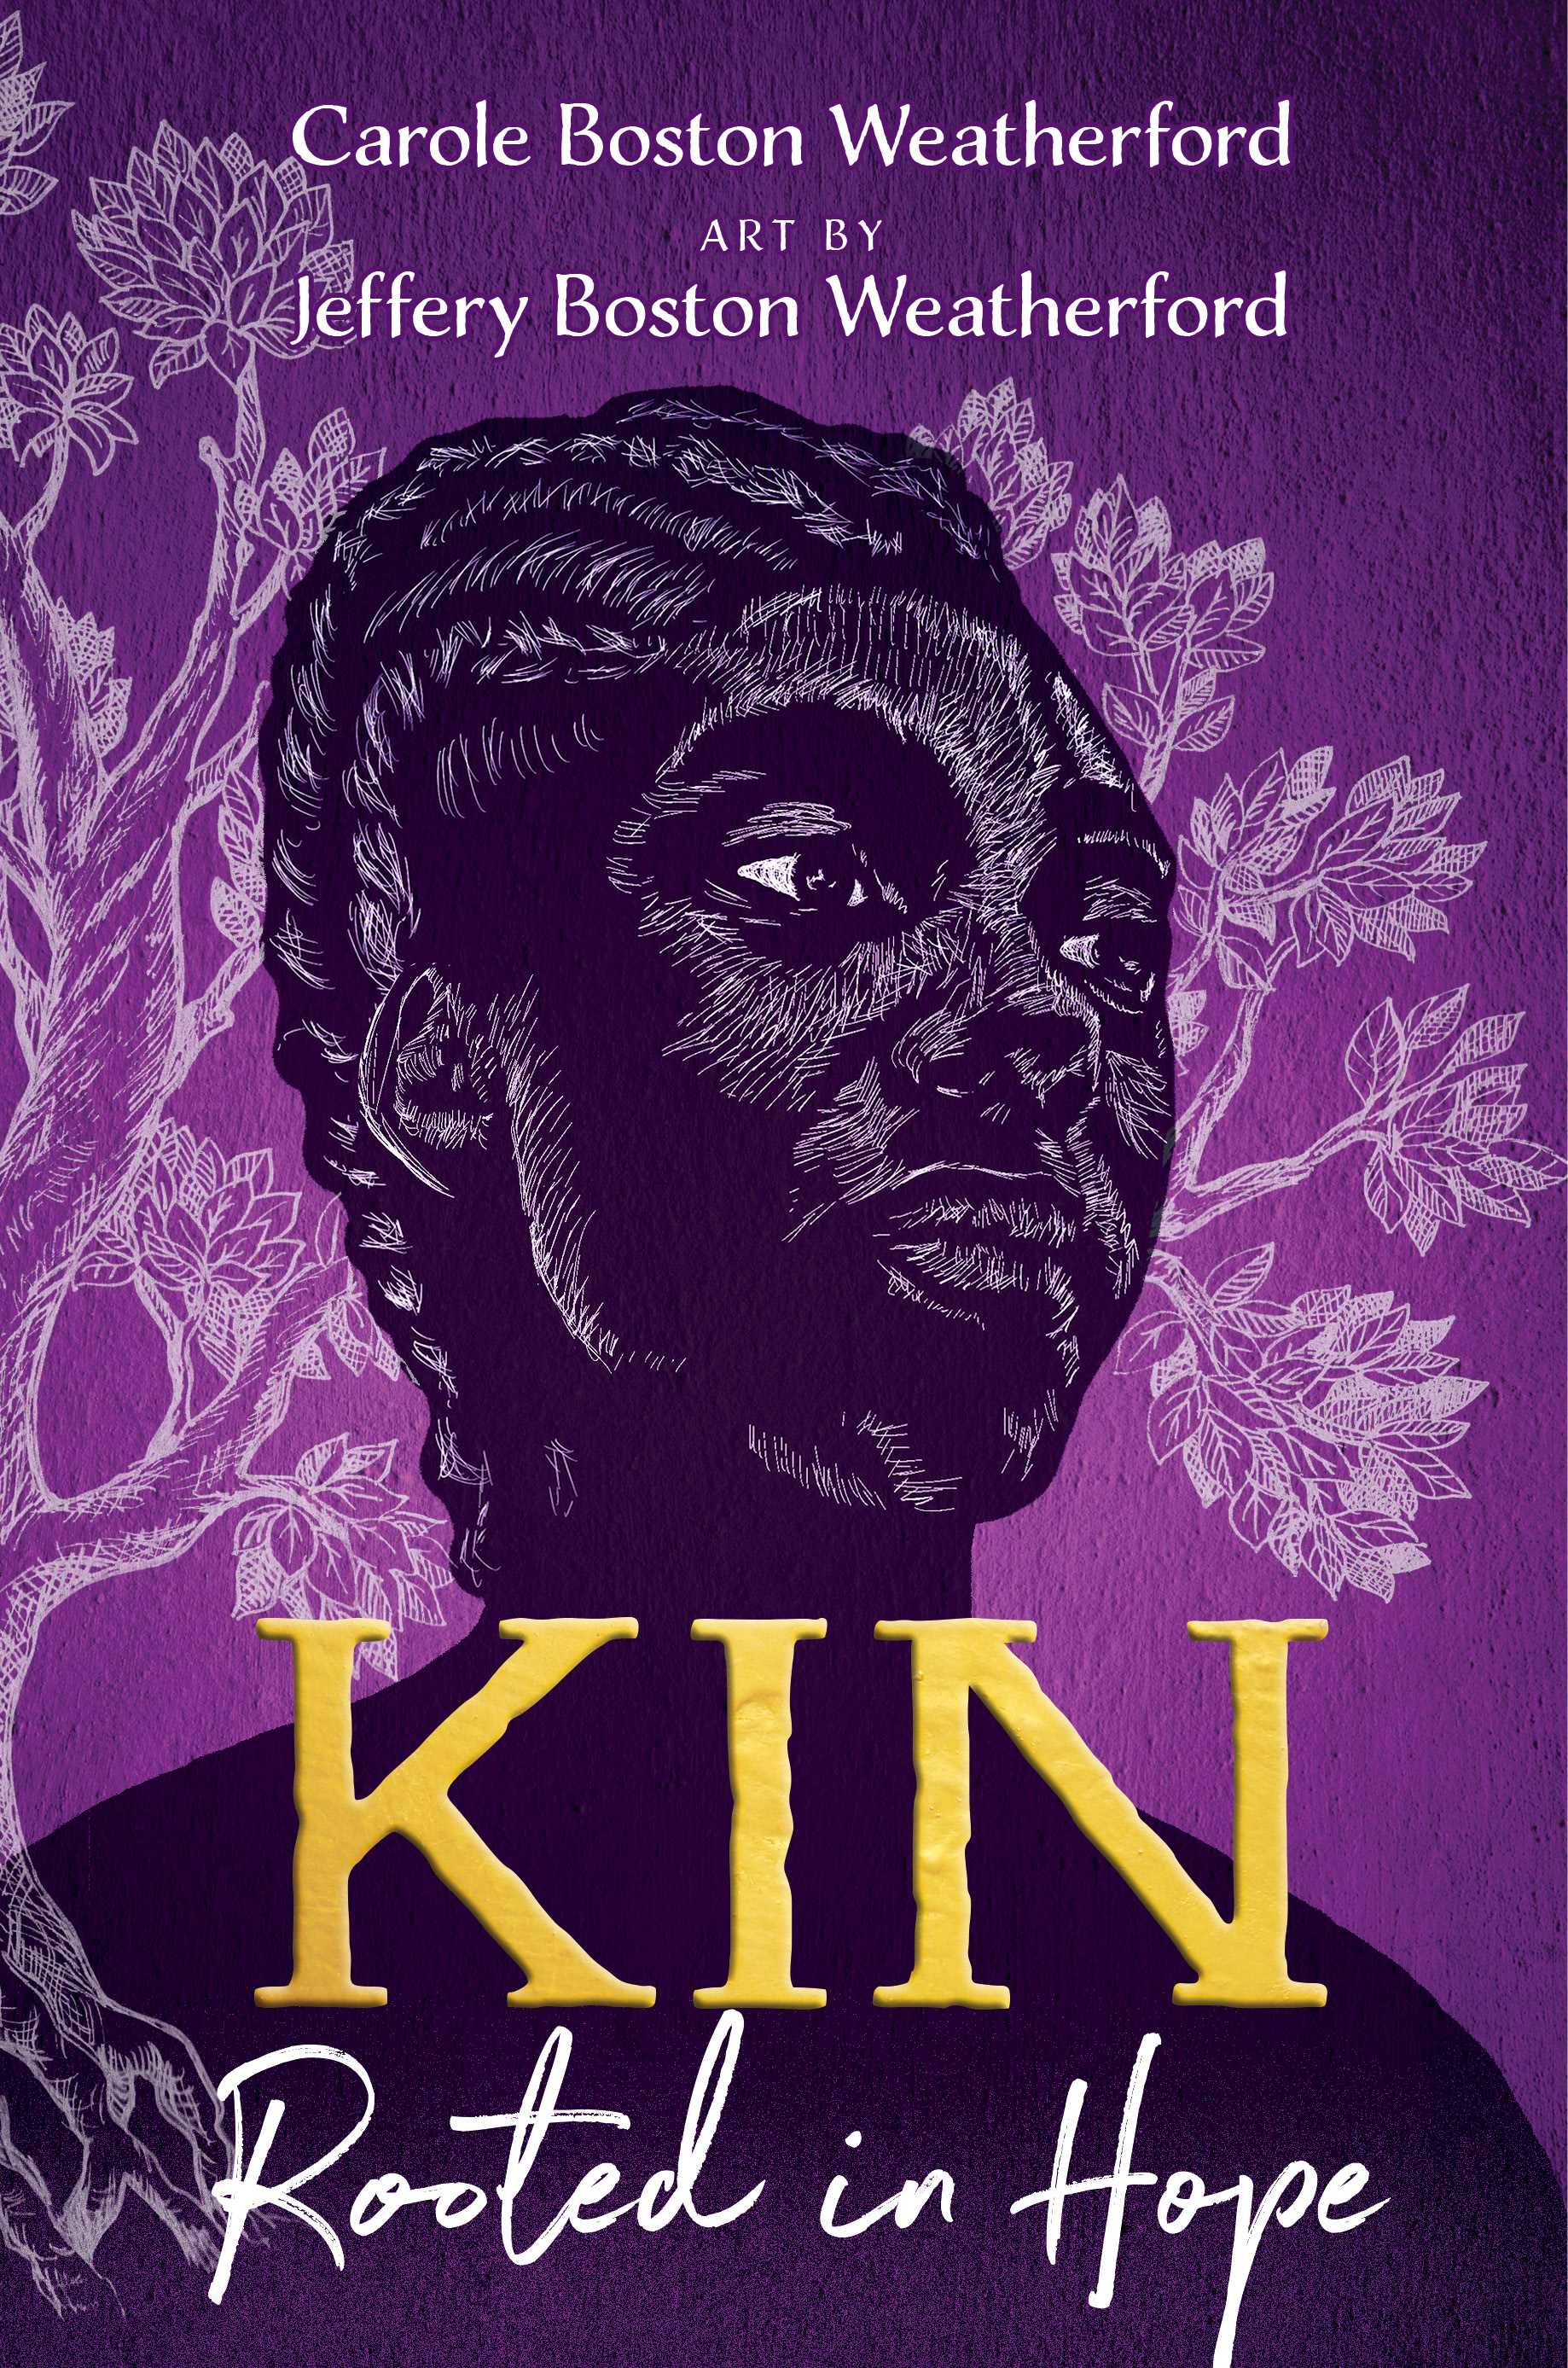 'Kin: Rooted in Hope' tells a family's history shaped by enslavement and freedom on the Eastern Shore